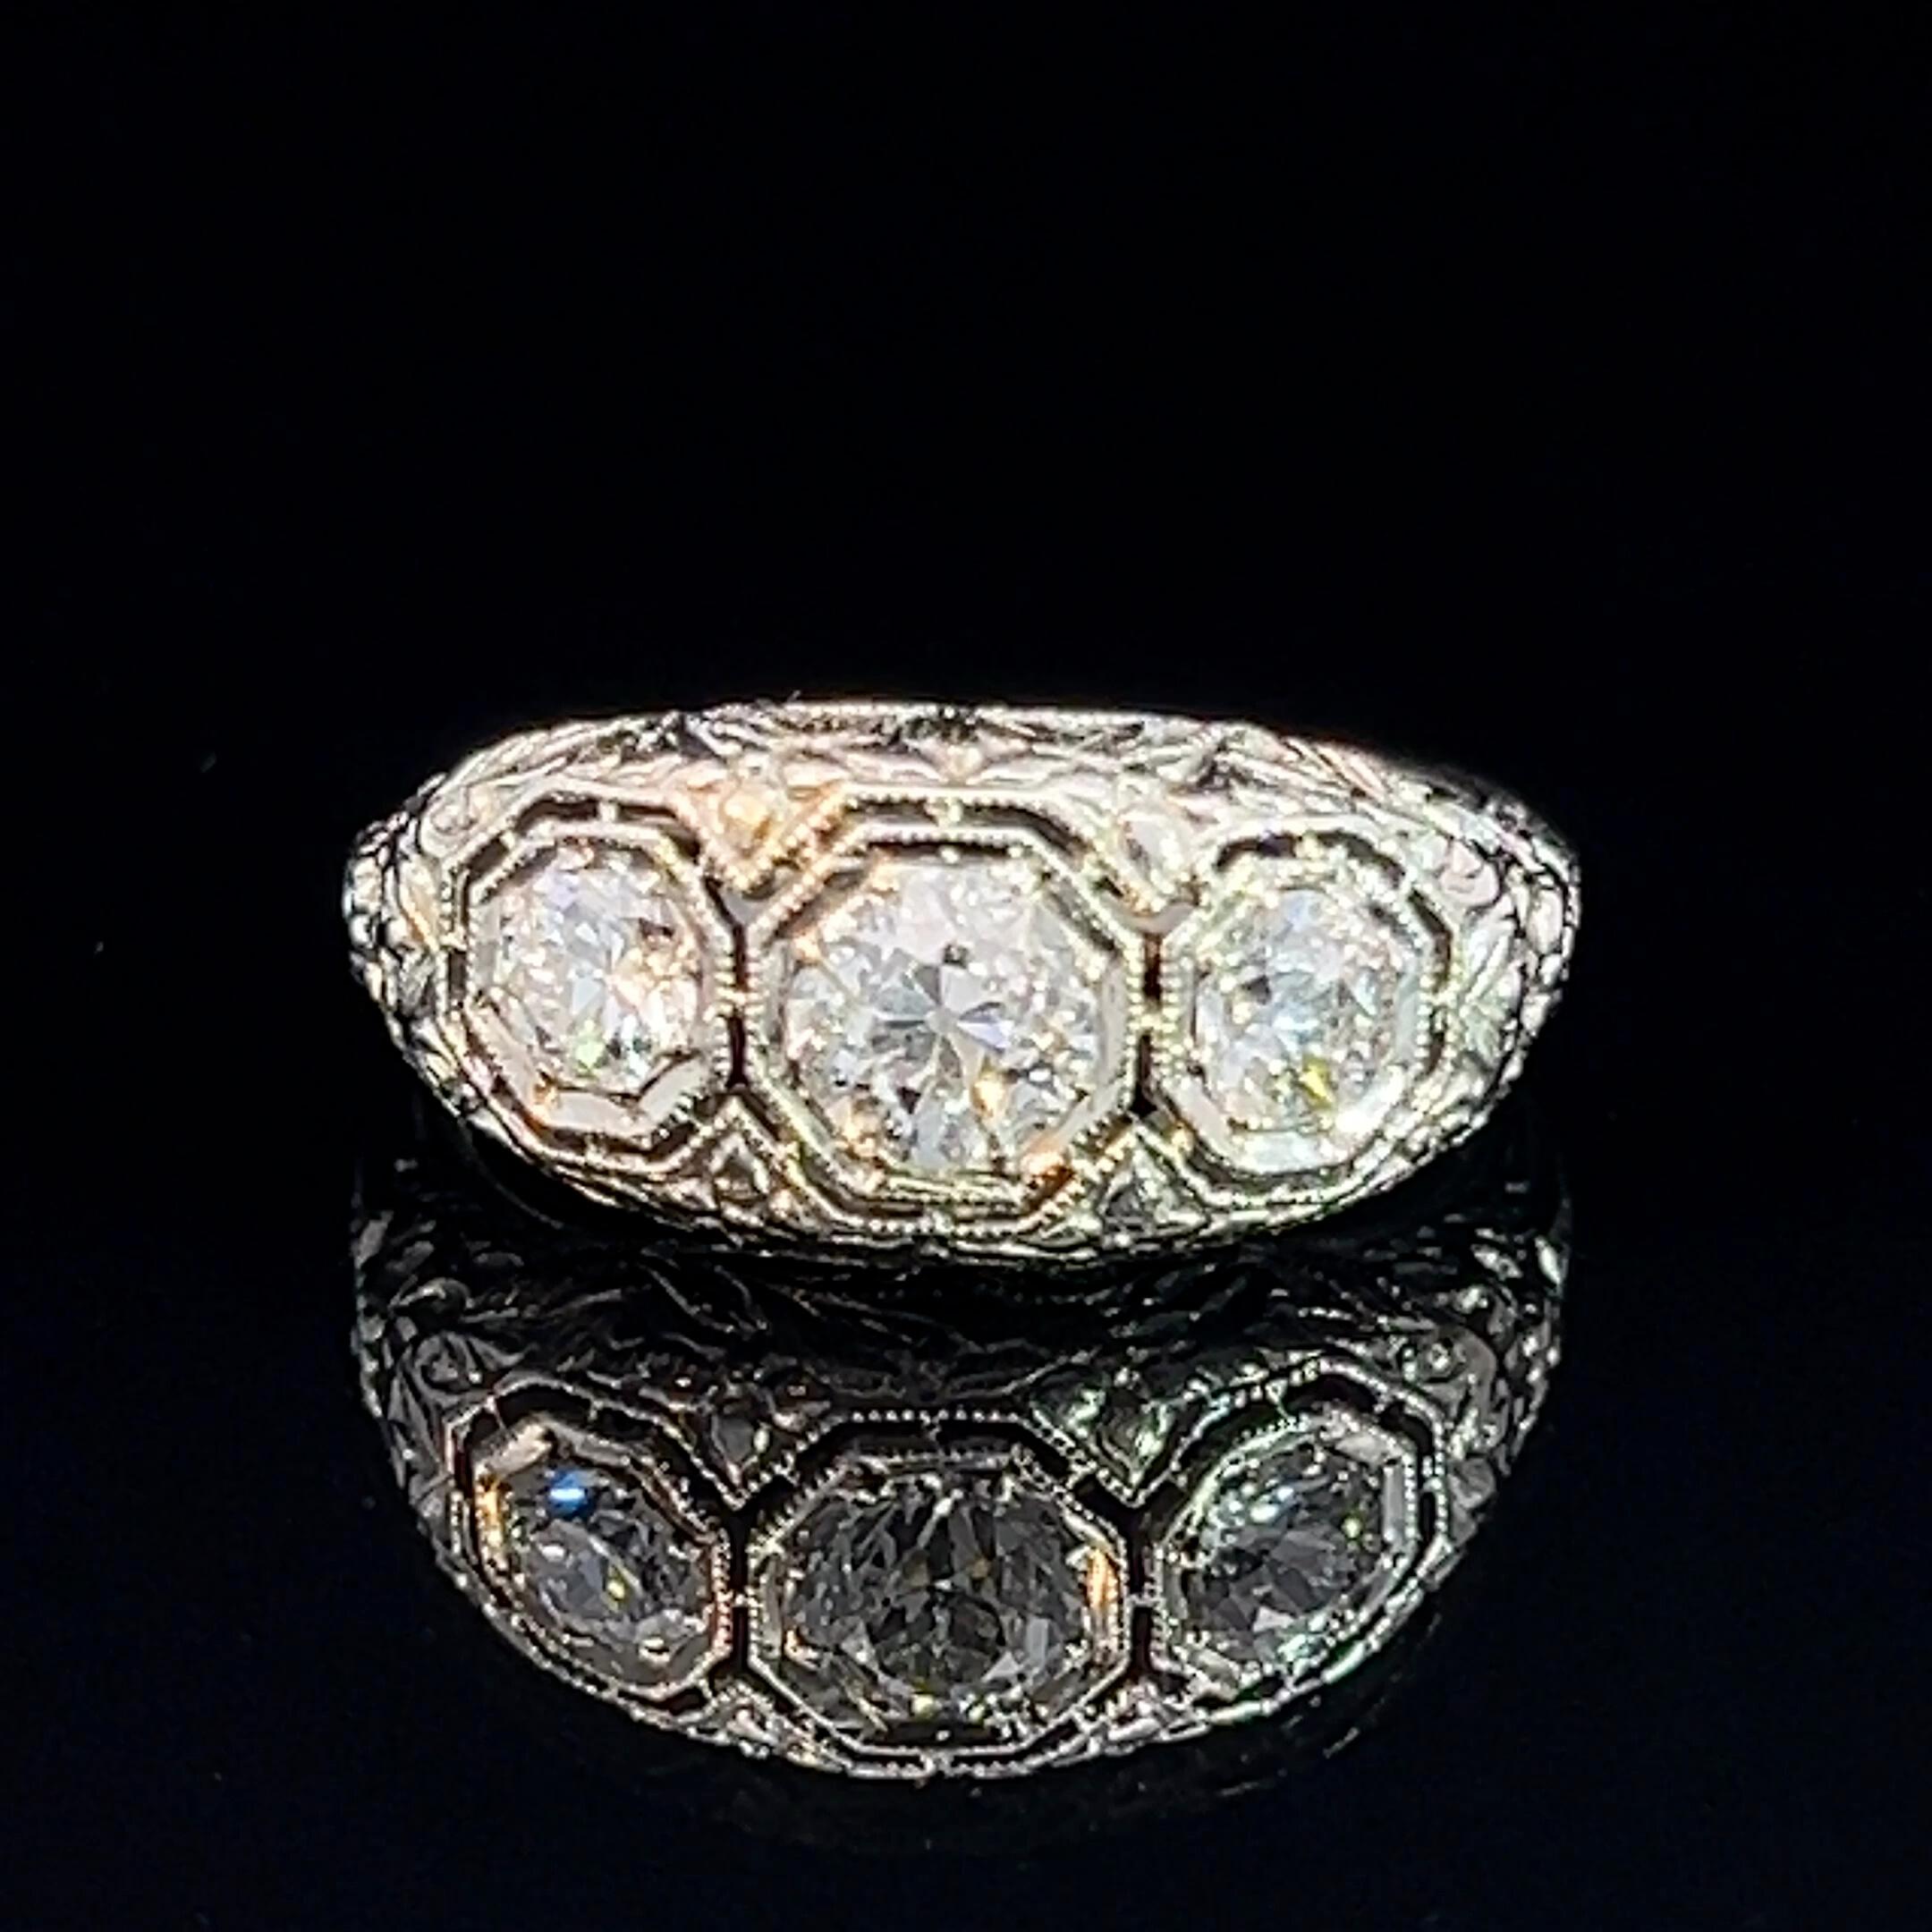 Art Deco white gold wide three-stone diamond ring featuring pierced filigree setting with hand engraved floral motifs.

Diamond: One 4.8mm early European cut diamond H-J colour, I1 material, estimated weight 0.50ct
Diamonds: Two 3.75mm early